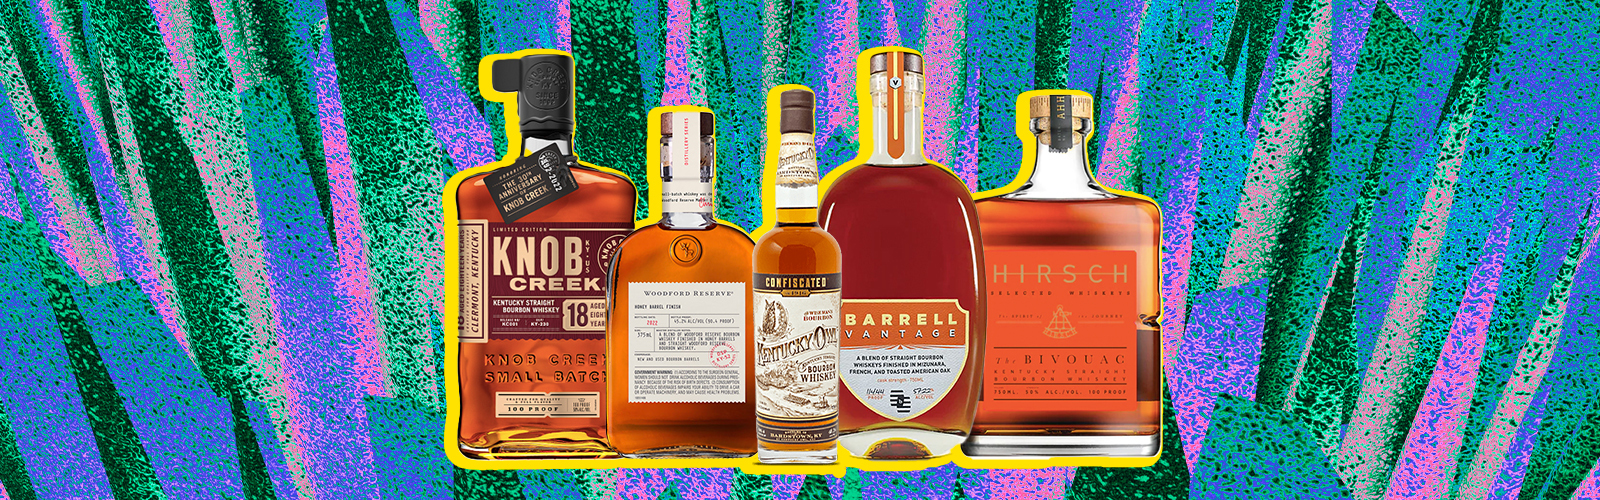 The Best Non-Alcoholic Whiskey, According to Our Blind Taste Test